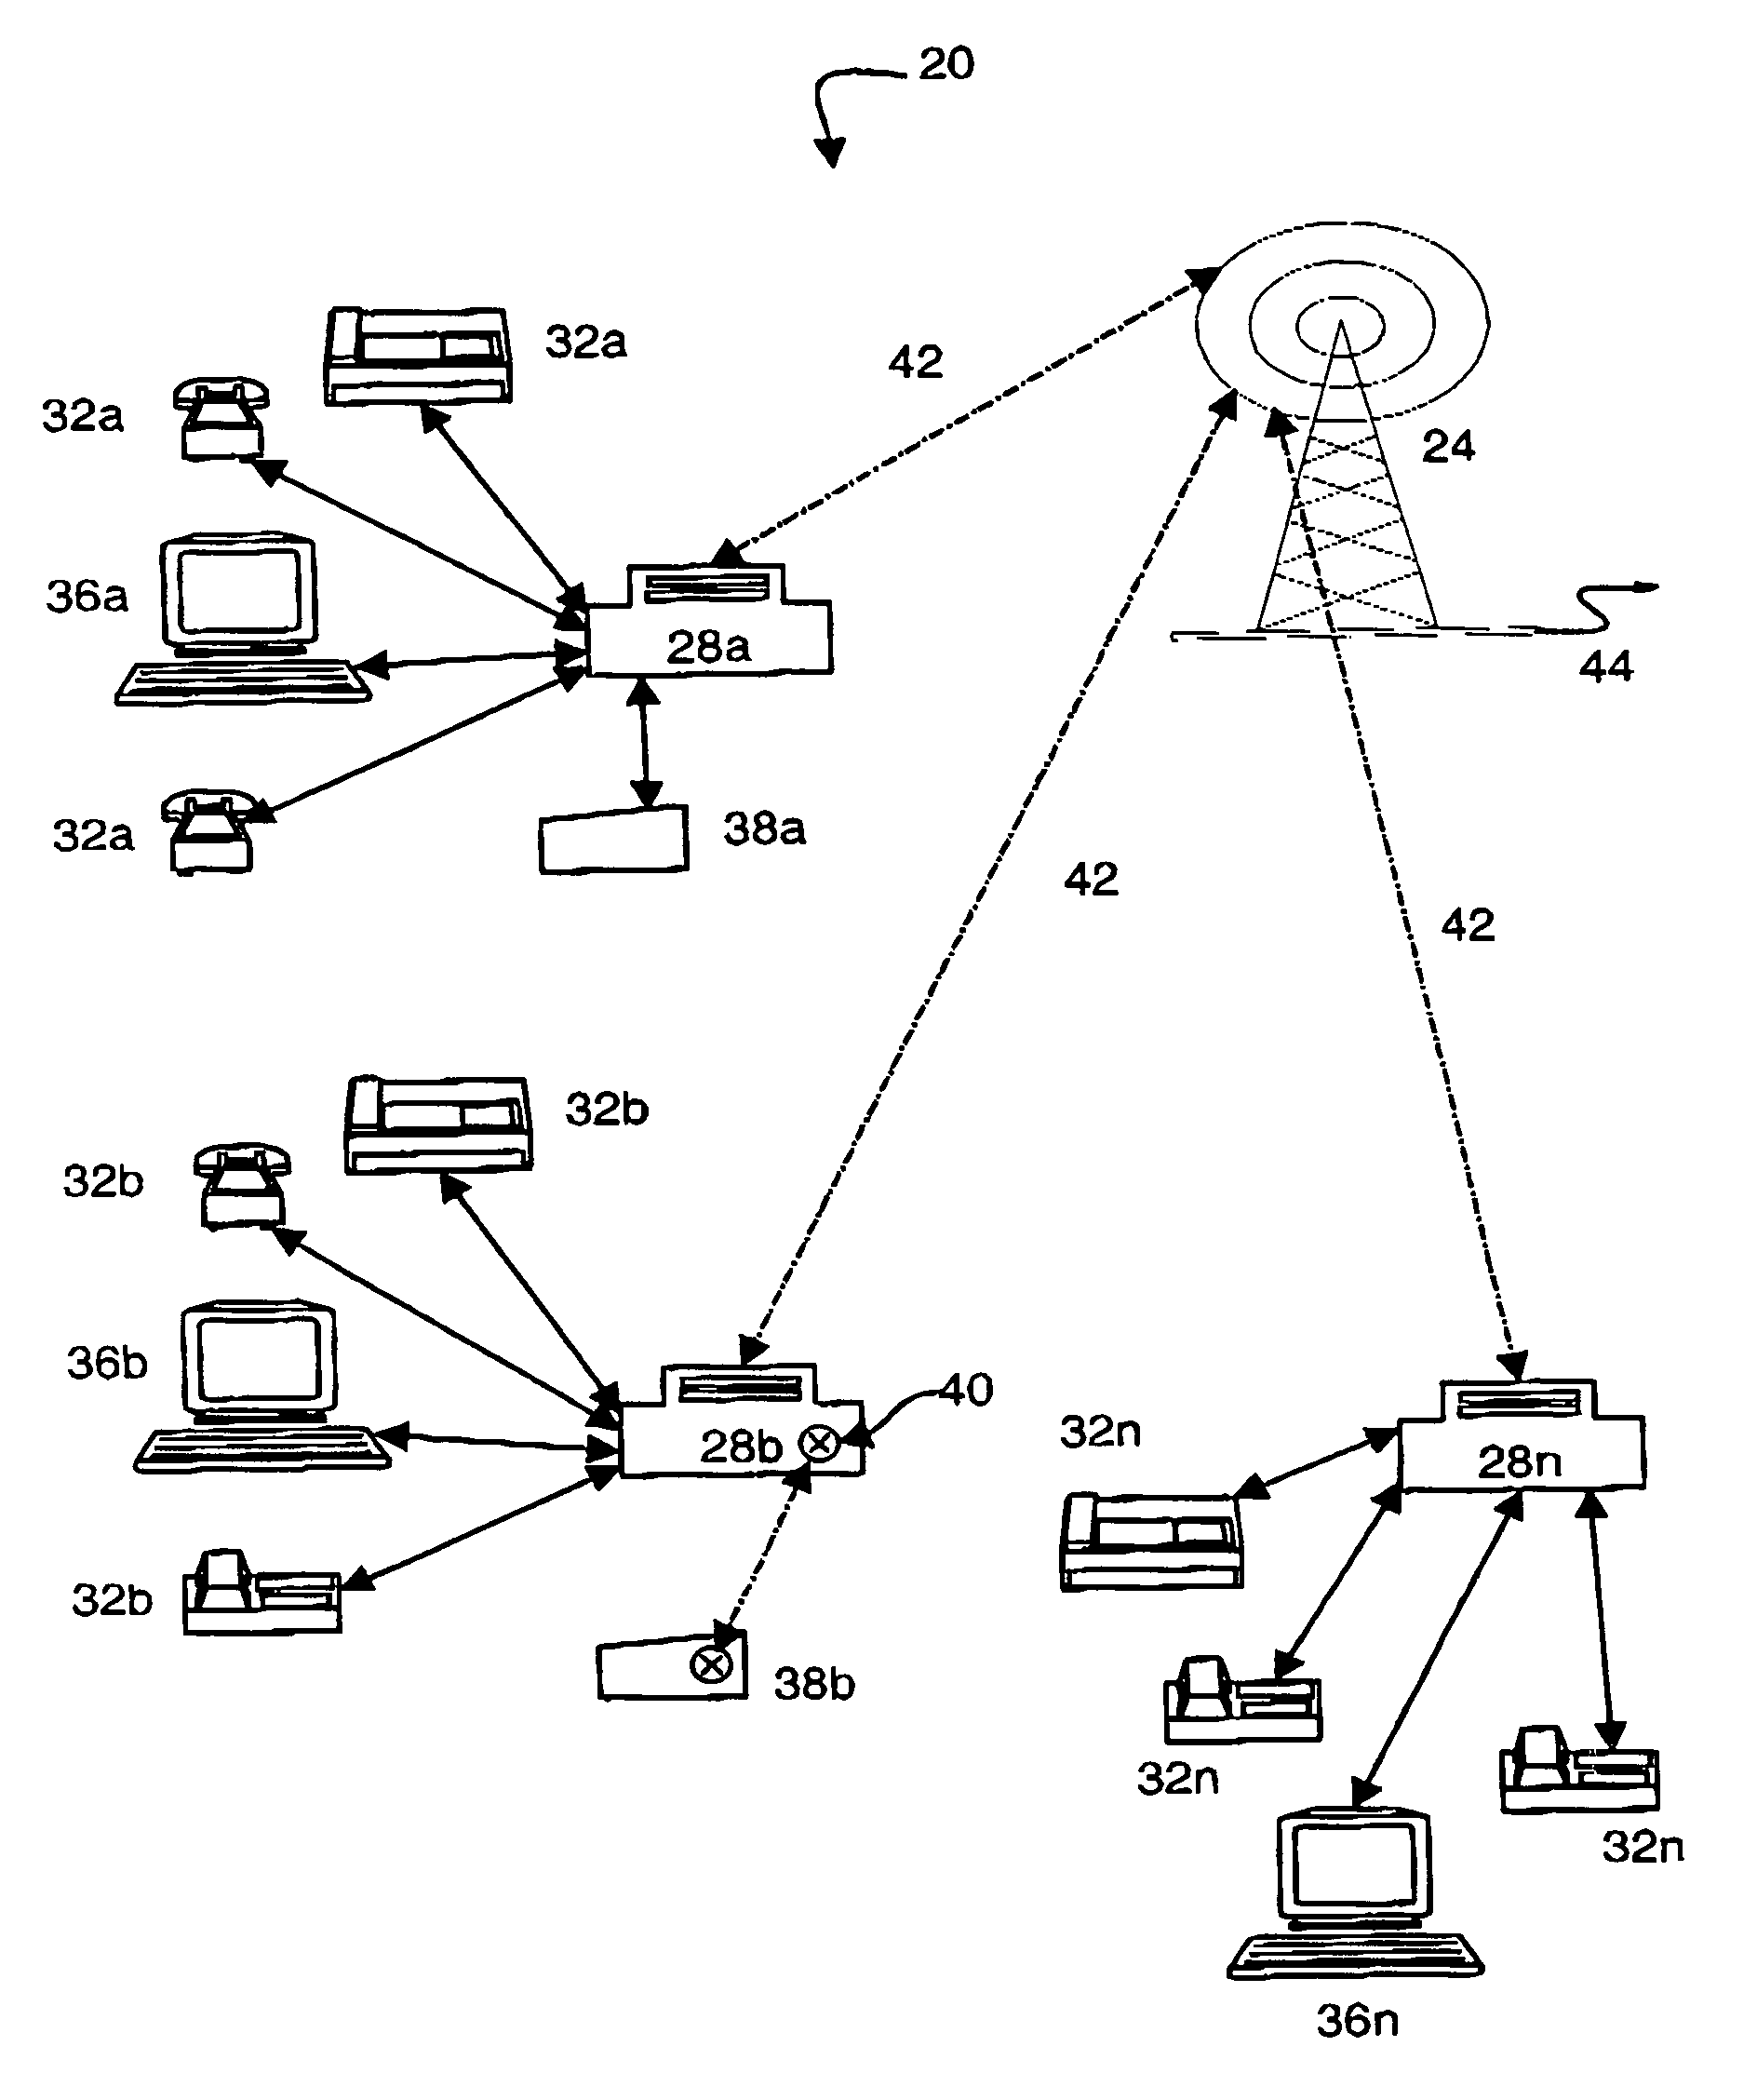 Control channel for a wireless digital subscriber line system